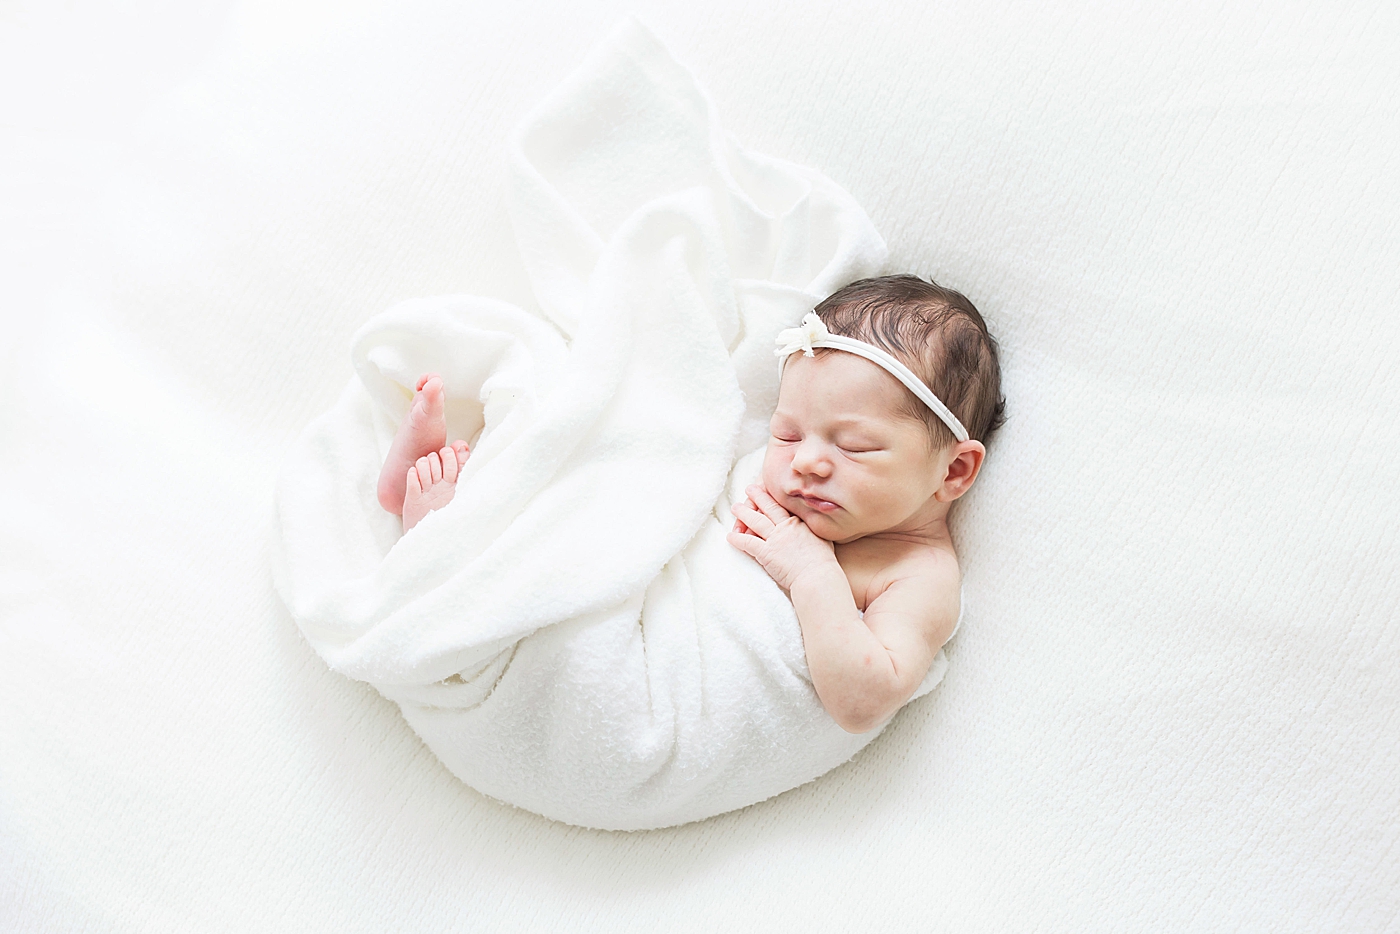 Baby girl swaddled in white for newborn photoshoot. Photo by Fresh Light Photography.